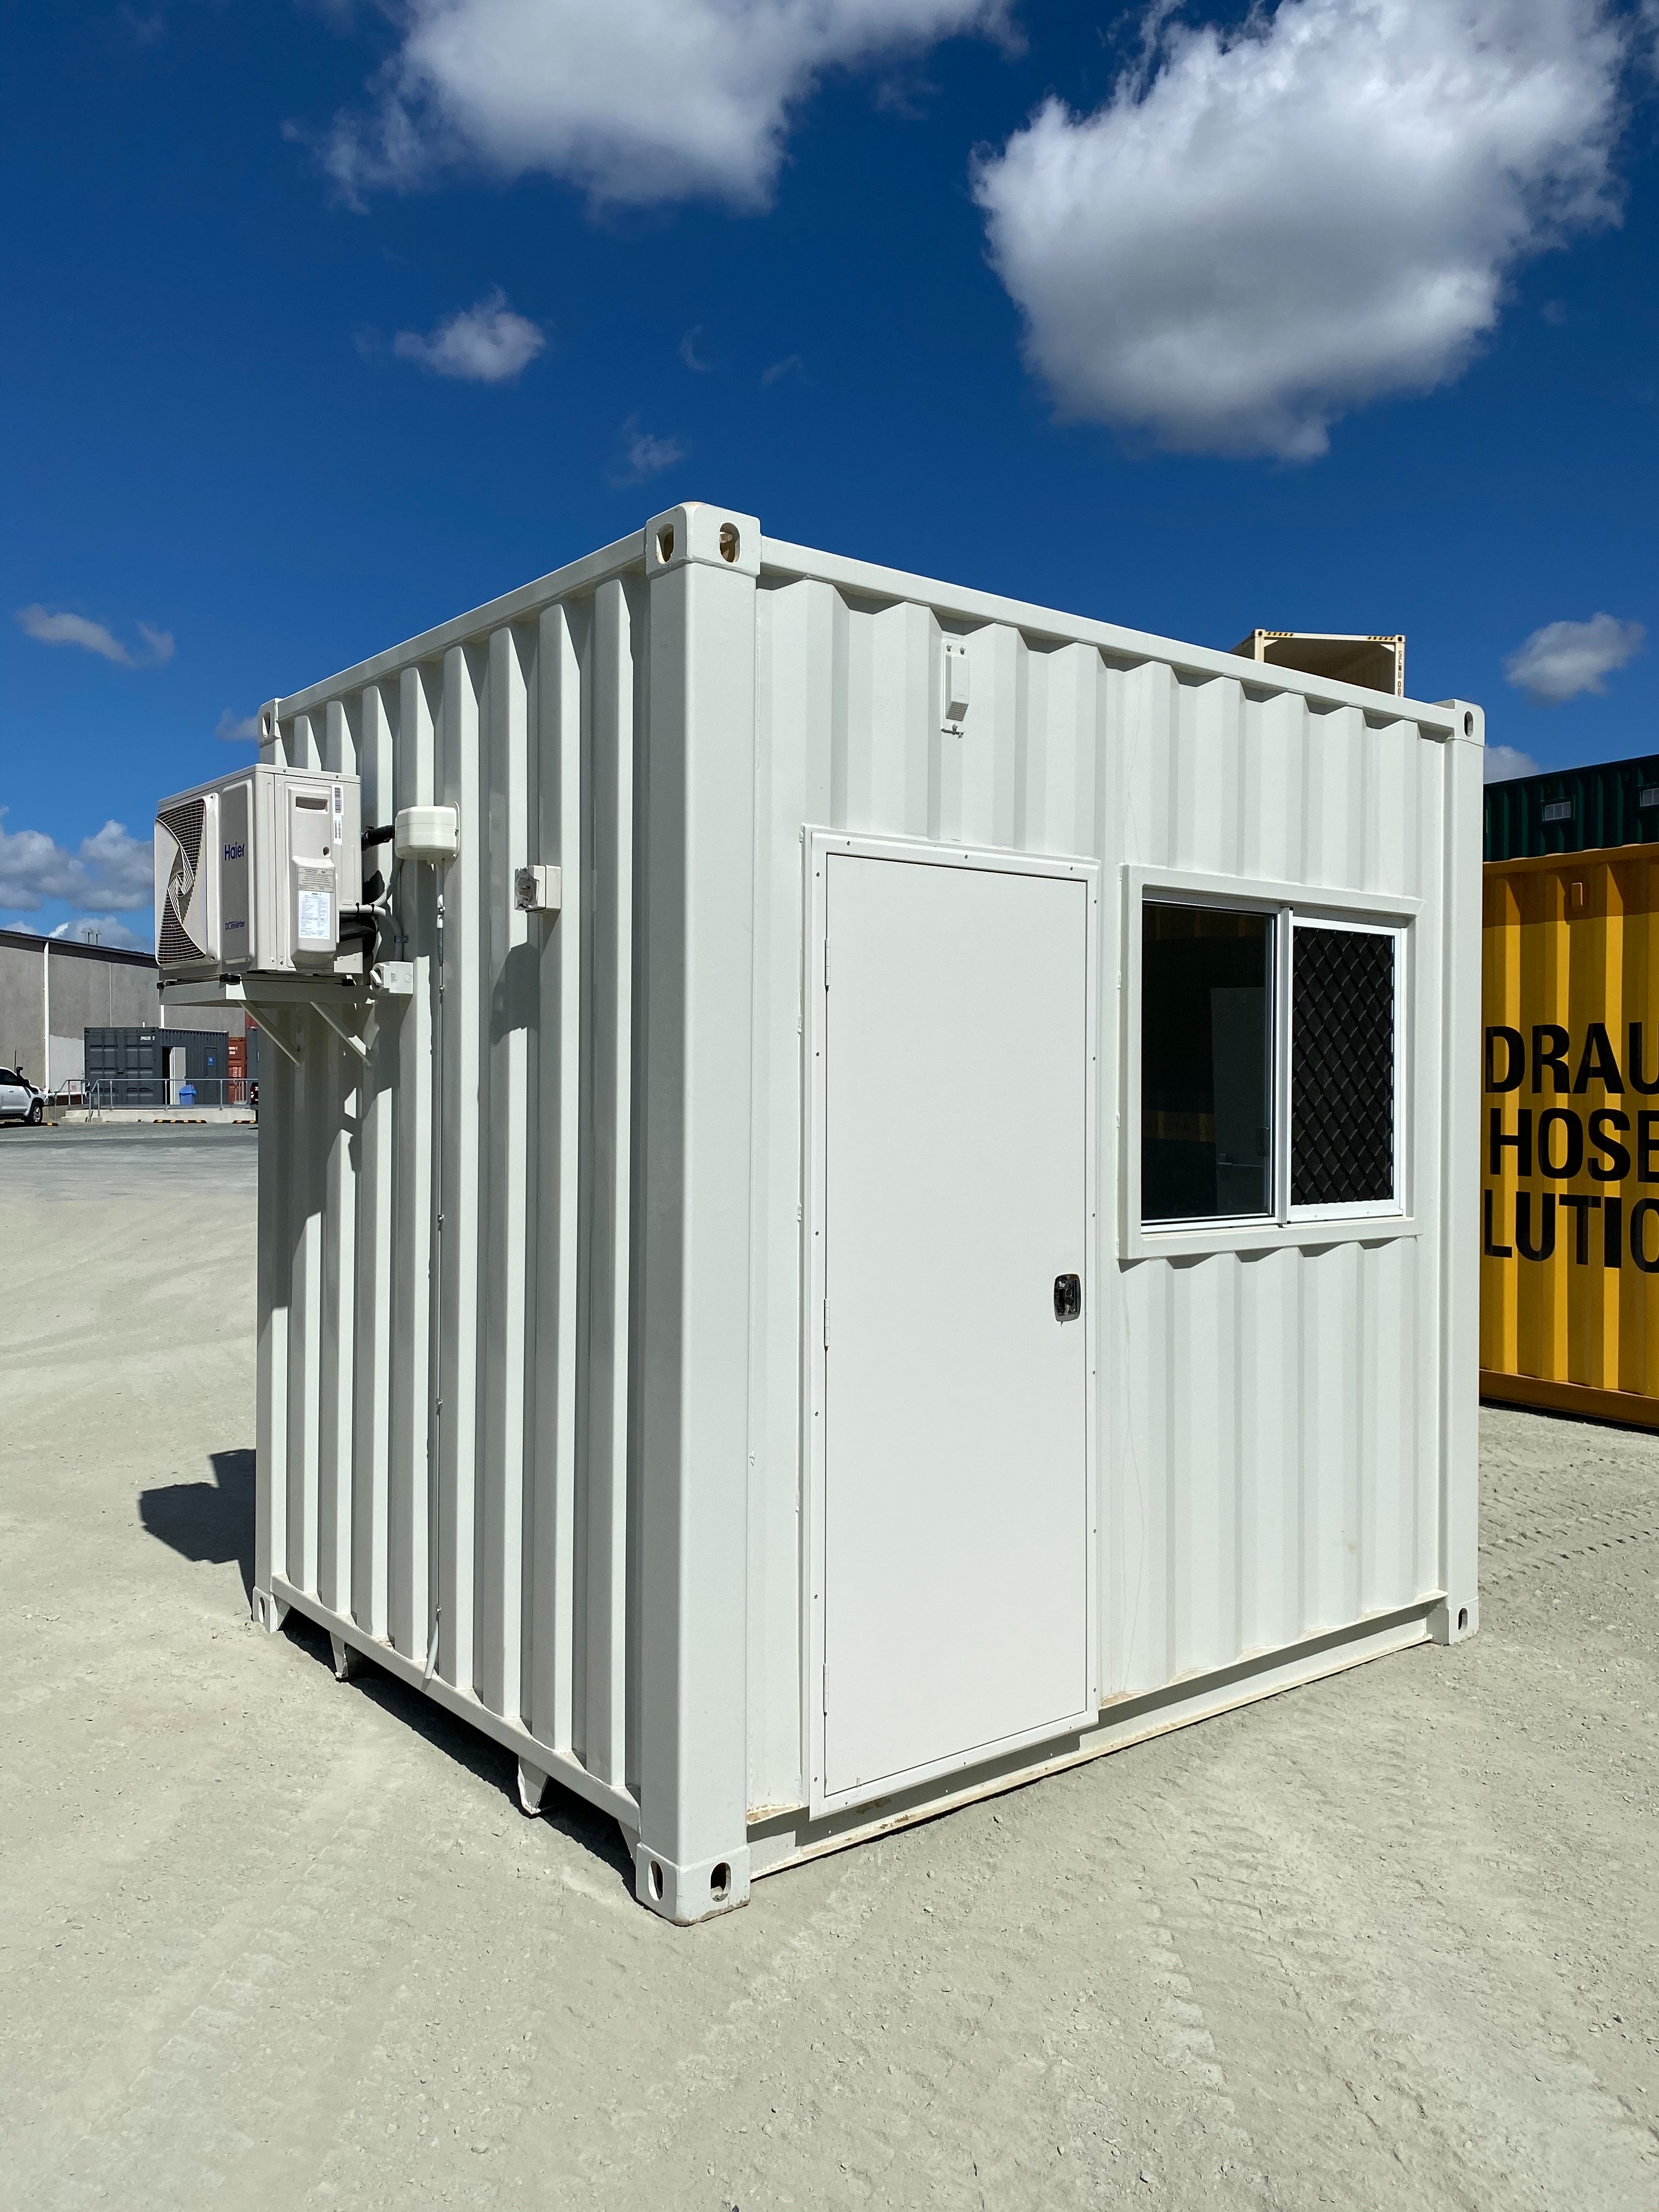 Unusual Uses for Shipping Containers – premierbox